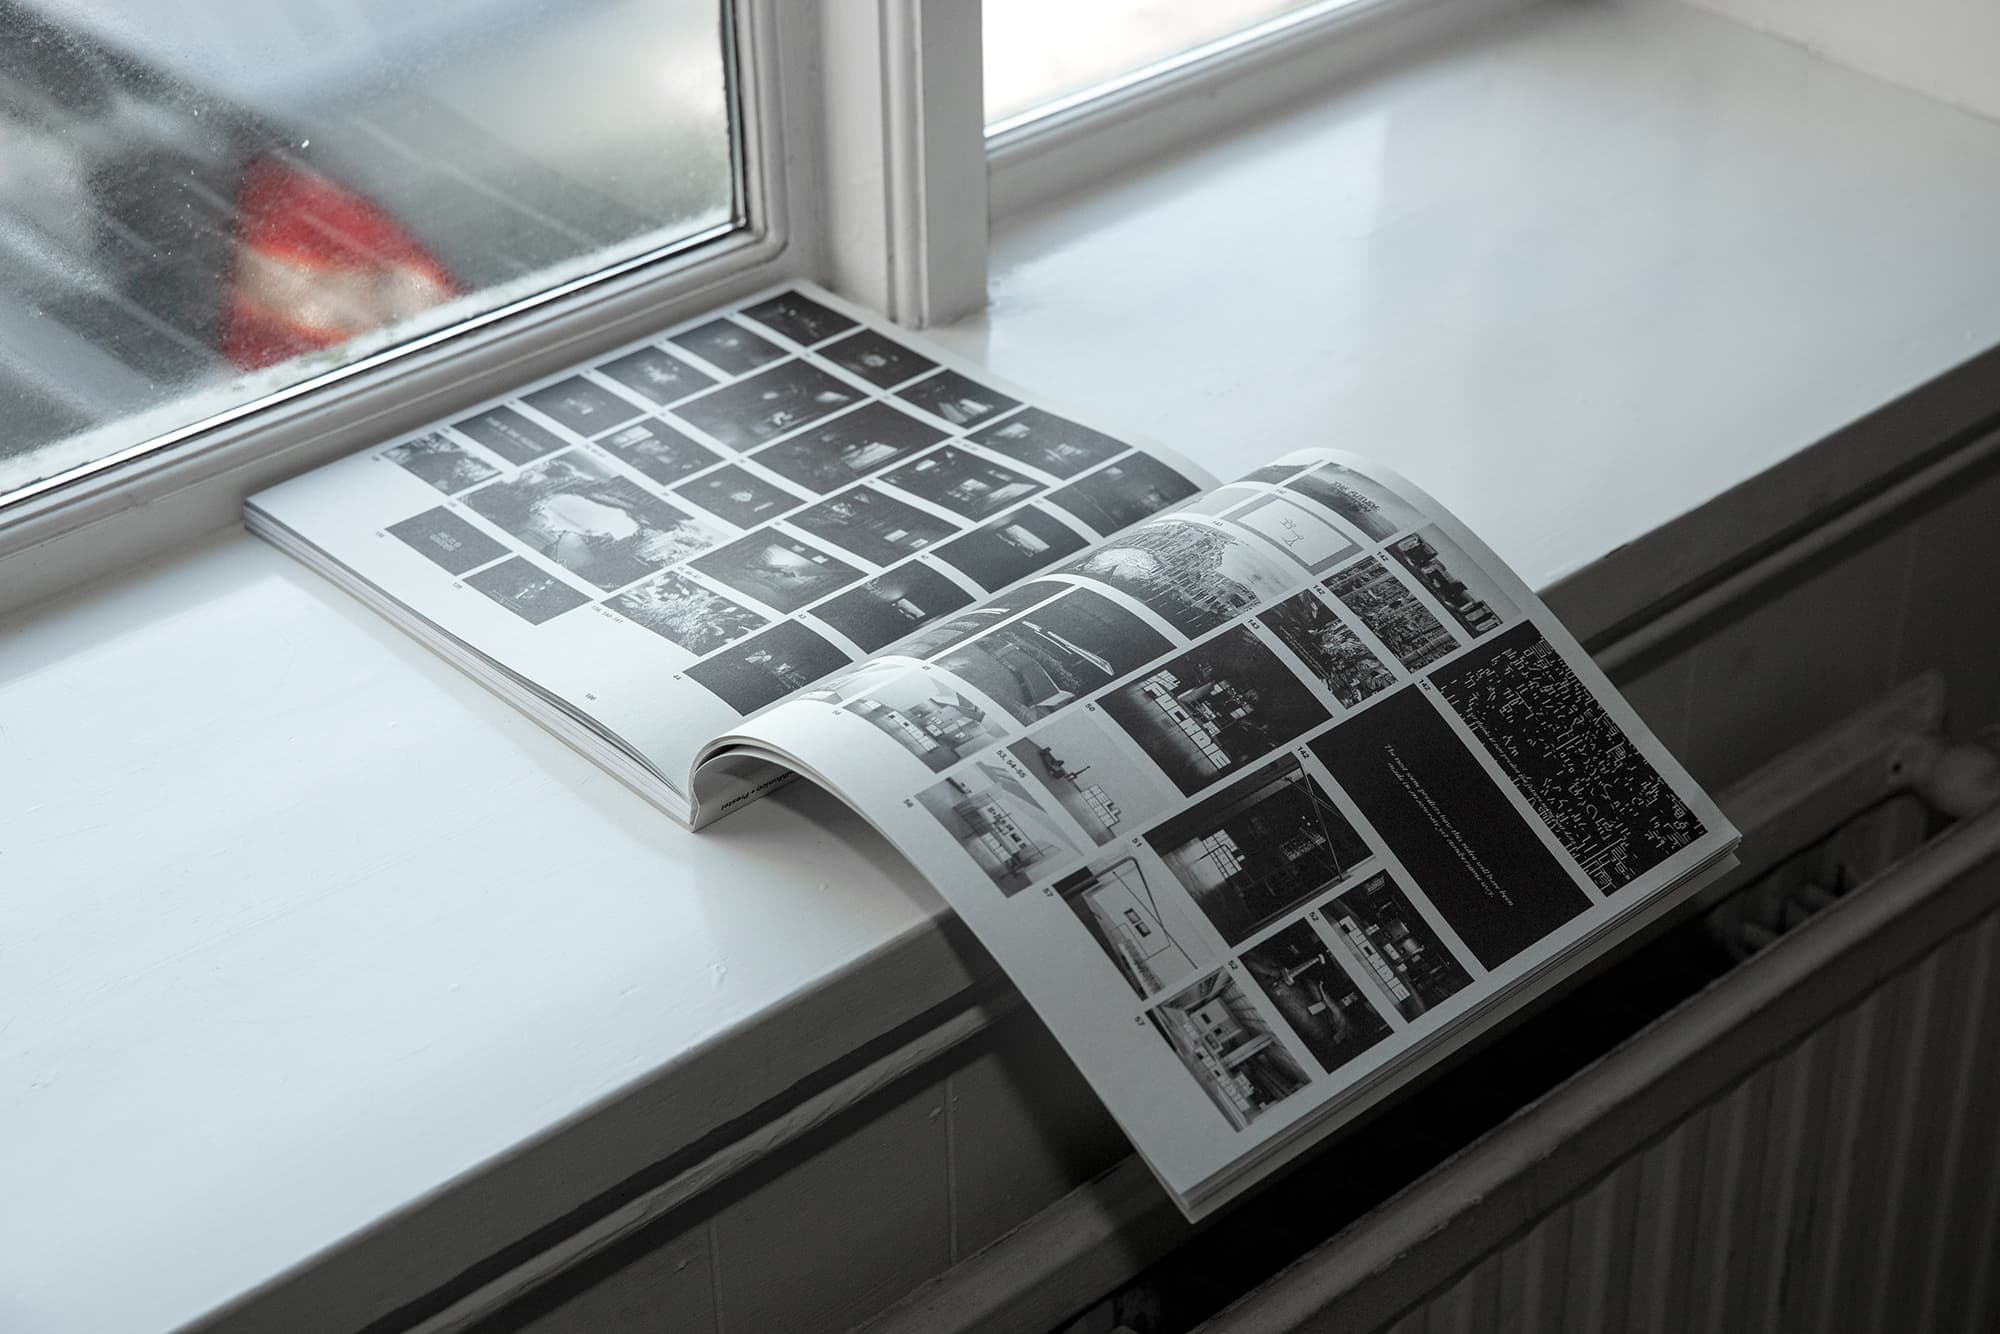 An open book sitting on a window sill. The book spread shows a mosiac of multiple black and white images.